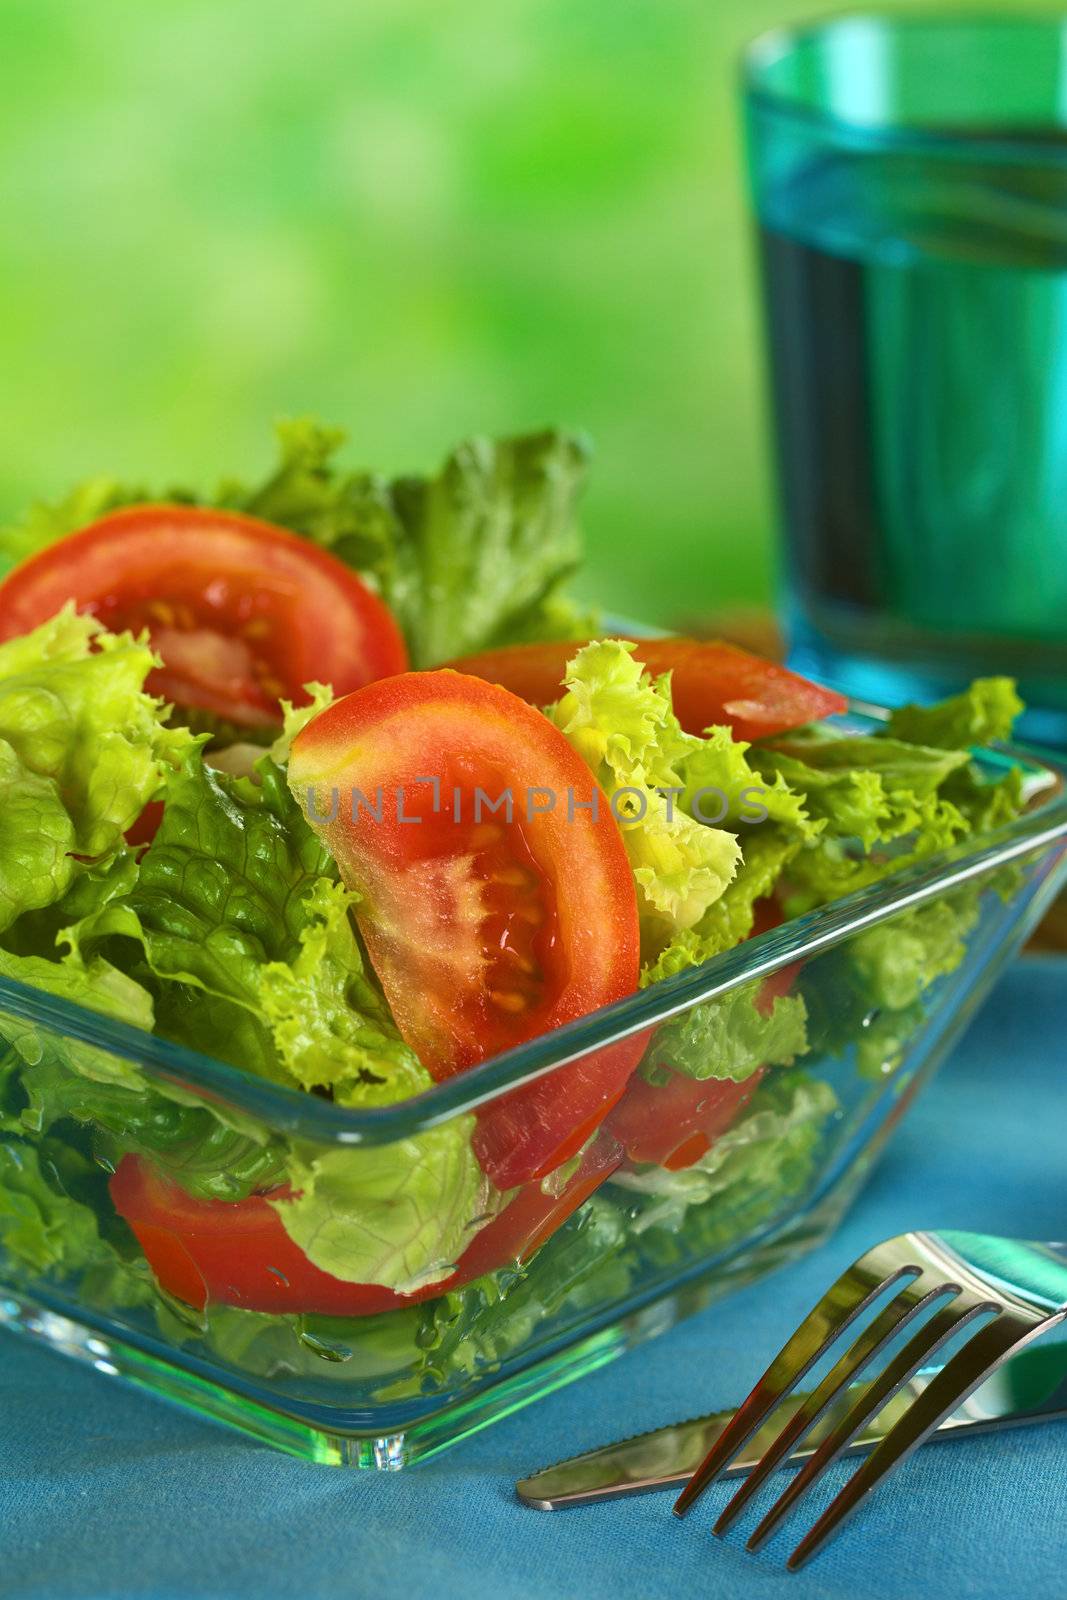 Fresh salad of lettuce and tomato with a glass of water in the back (Selective Focus, Focus on the tomato slice in the front) 